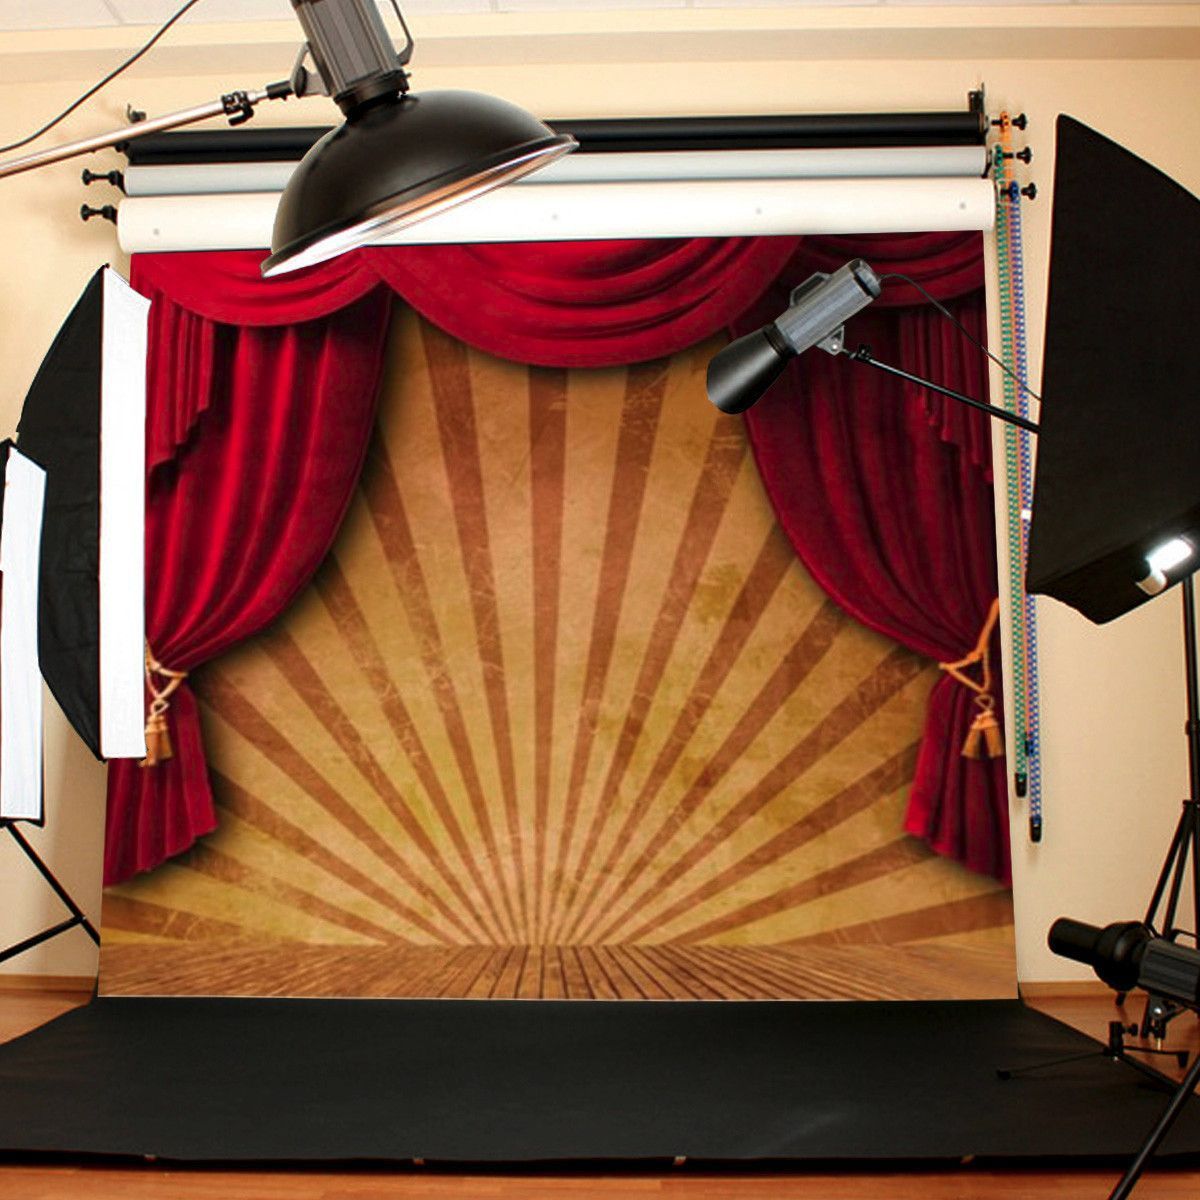 10x10FT-Circus-Red-Curtain-Stage-Photography-Backdrop-Studio-Prop-Background-1405462